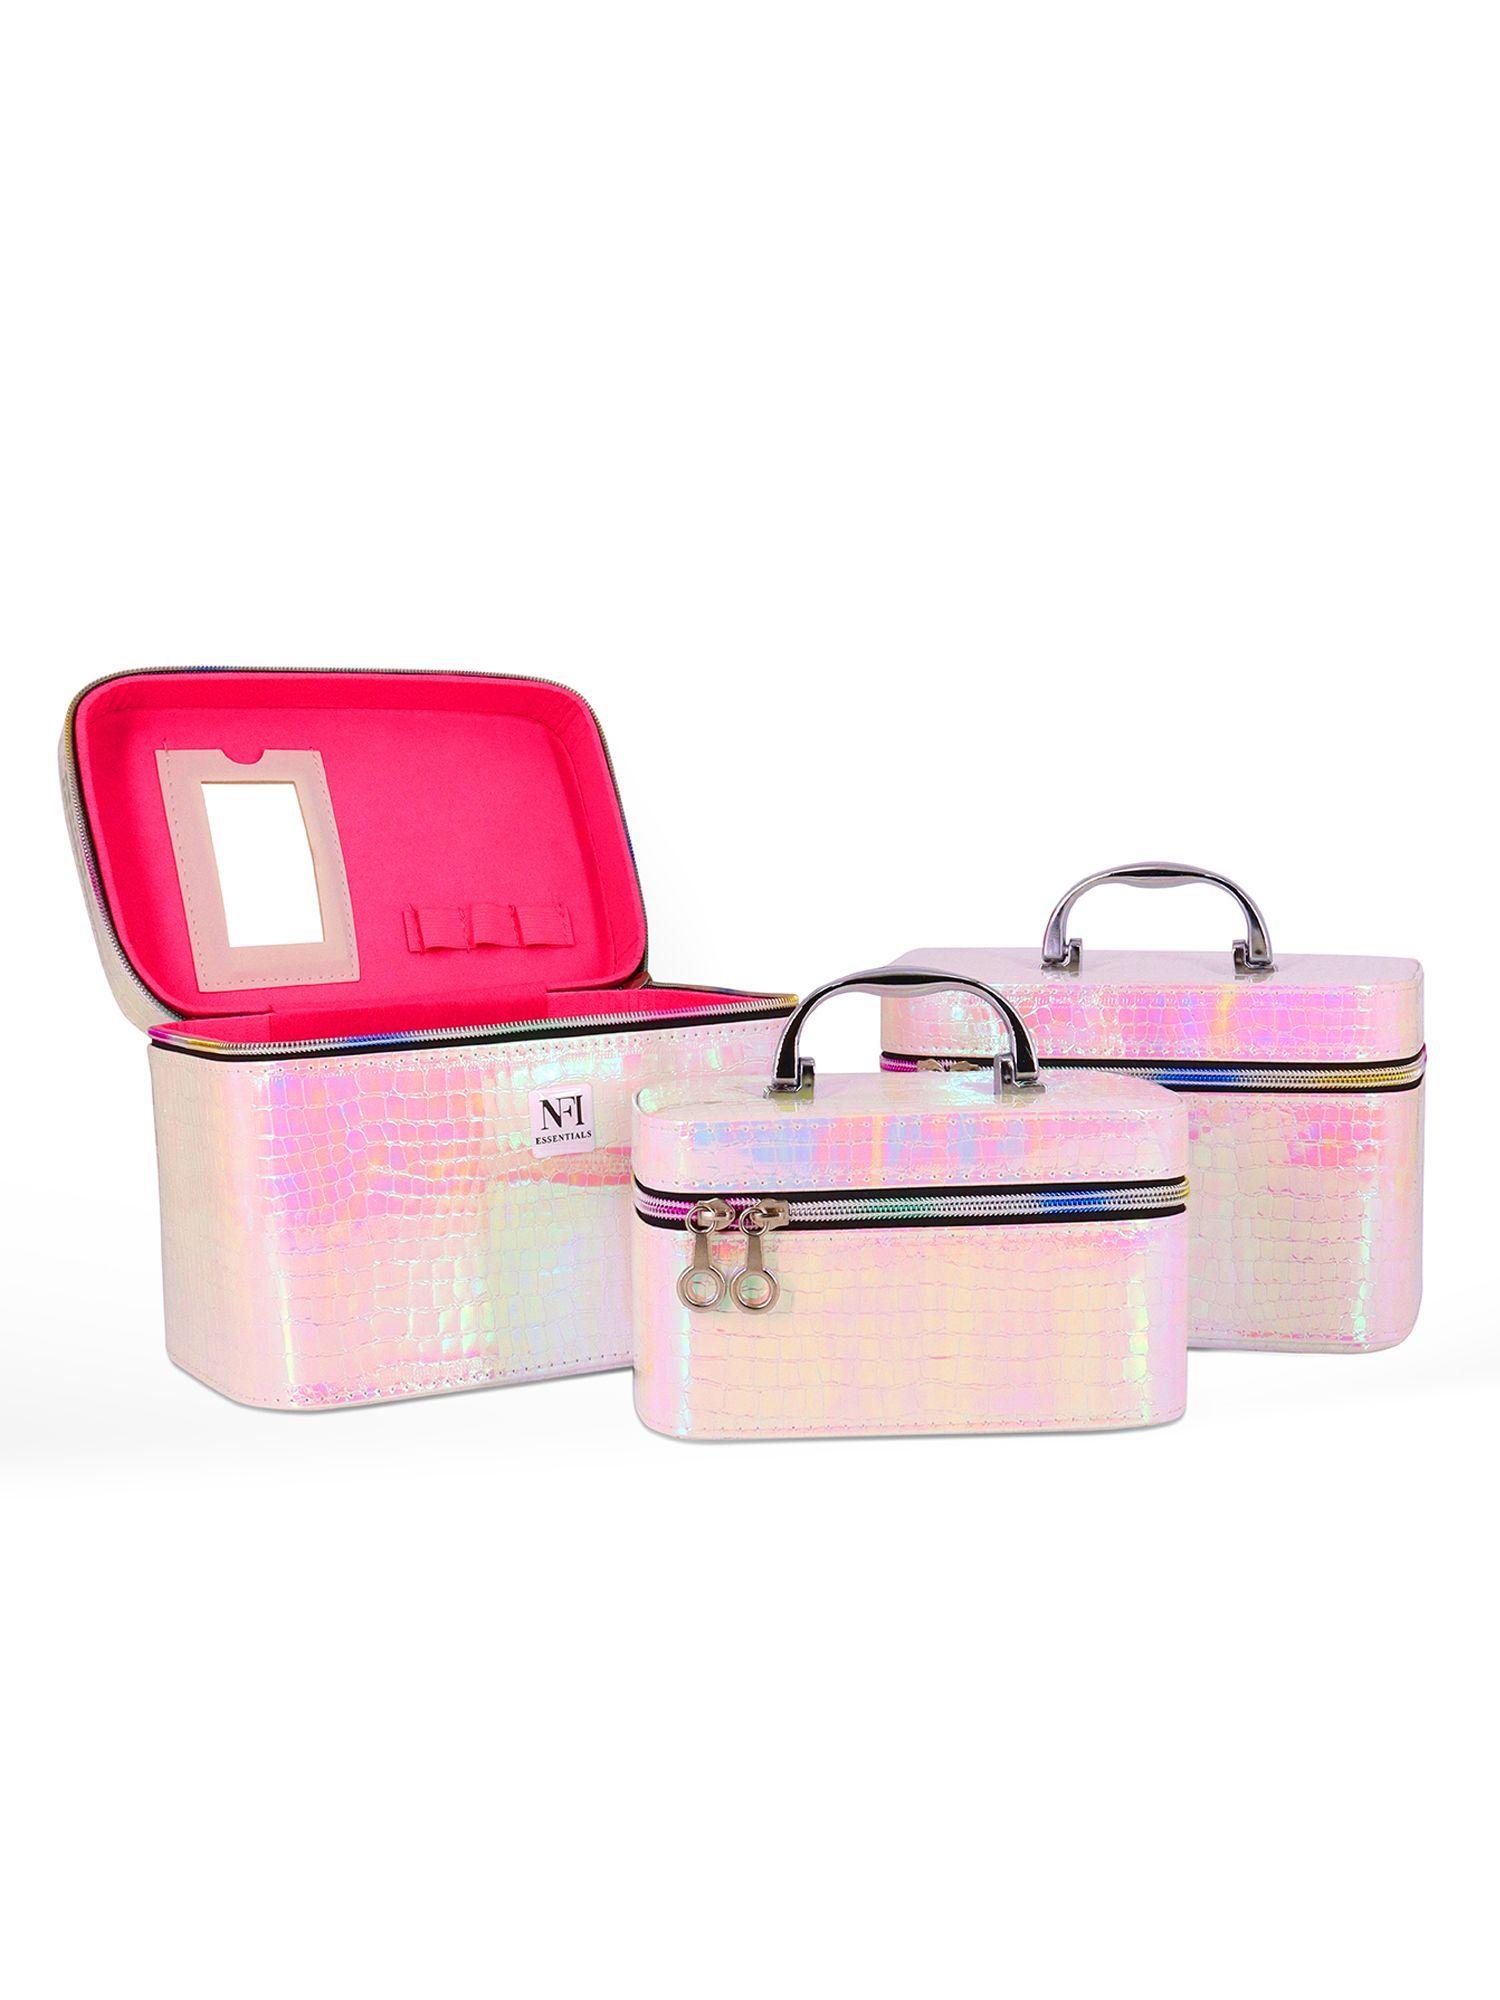 3 piece vanity box organizer with compact makeup mirror ( y64 white ) (one size)